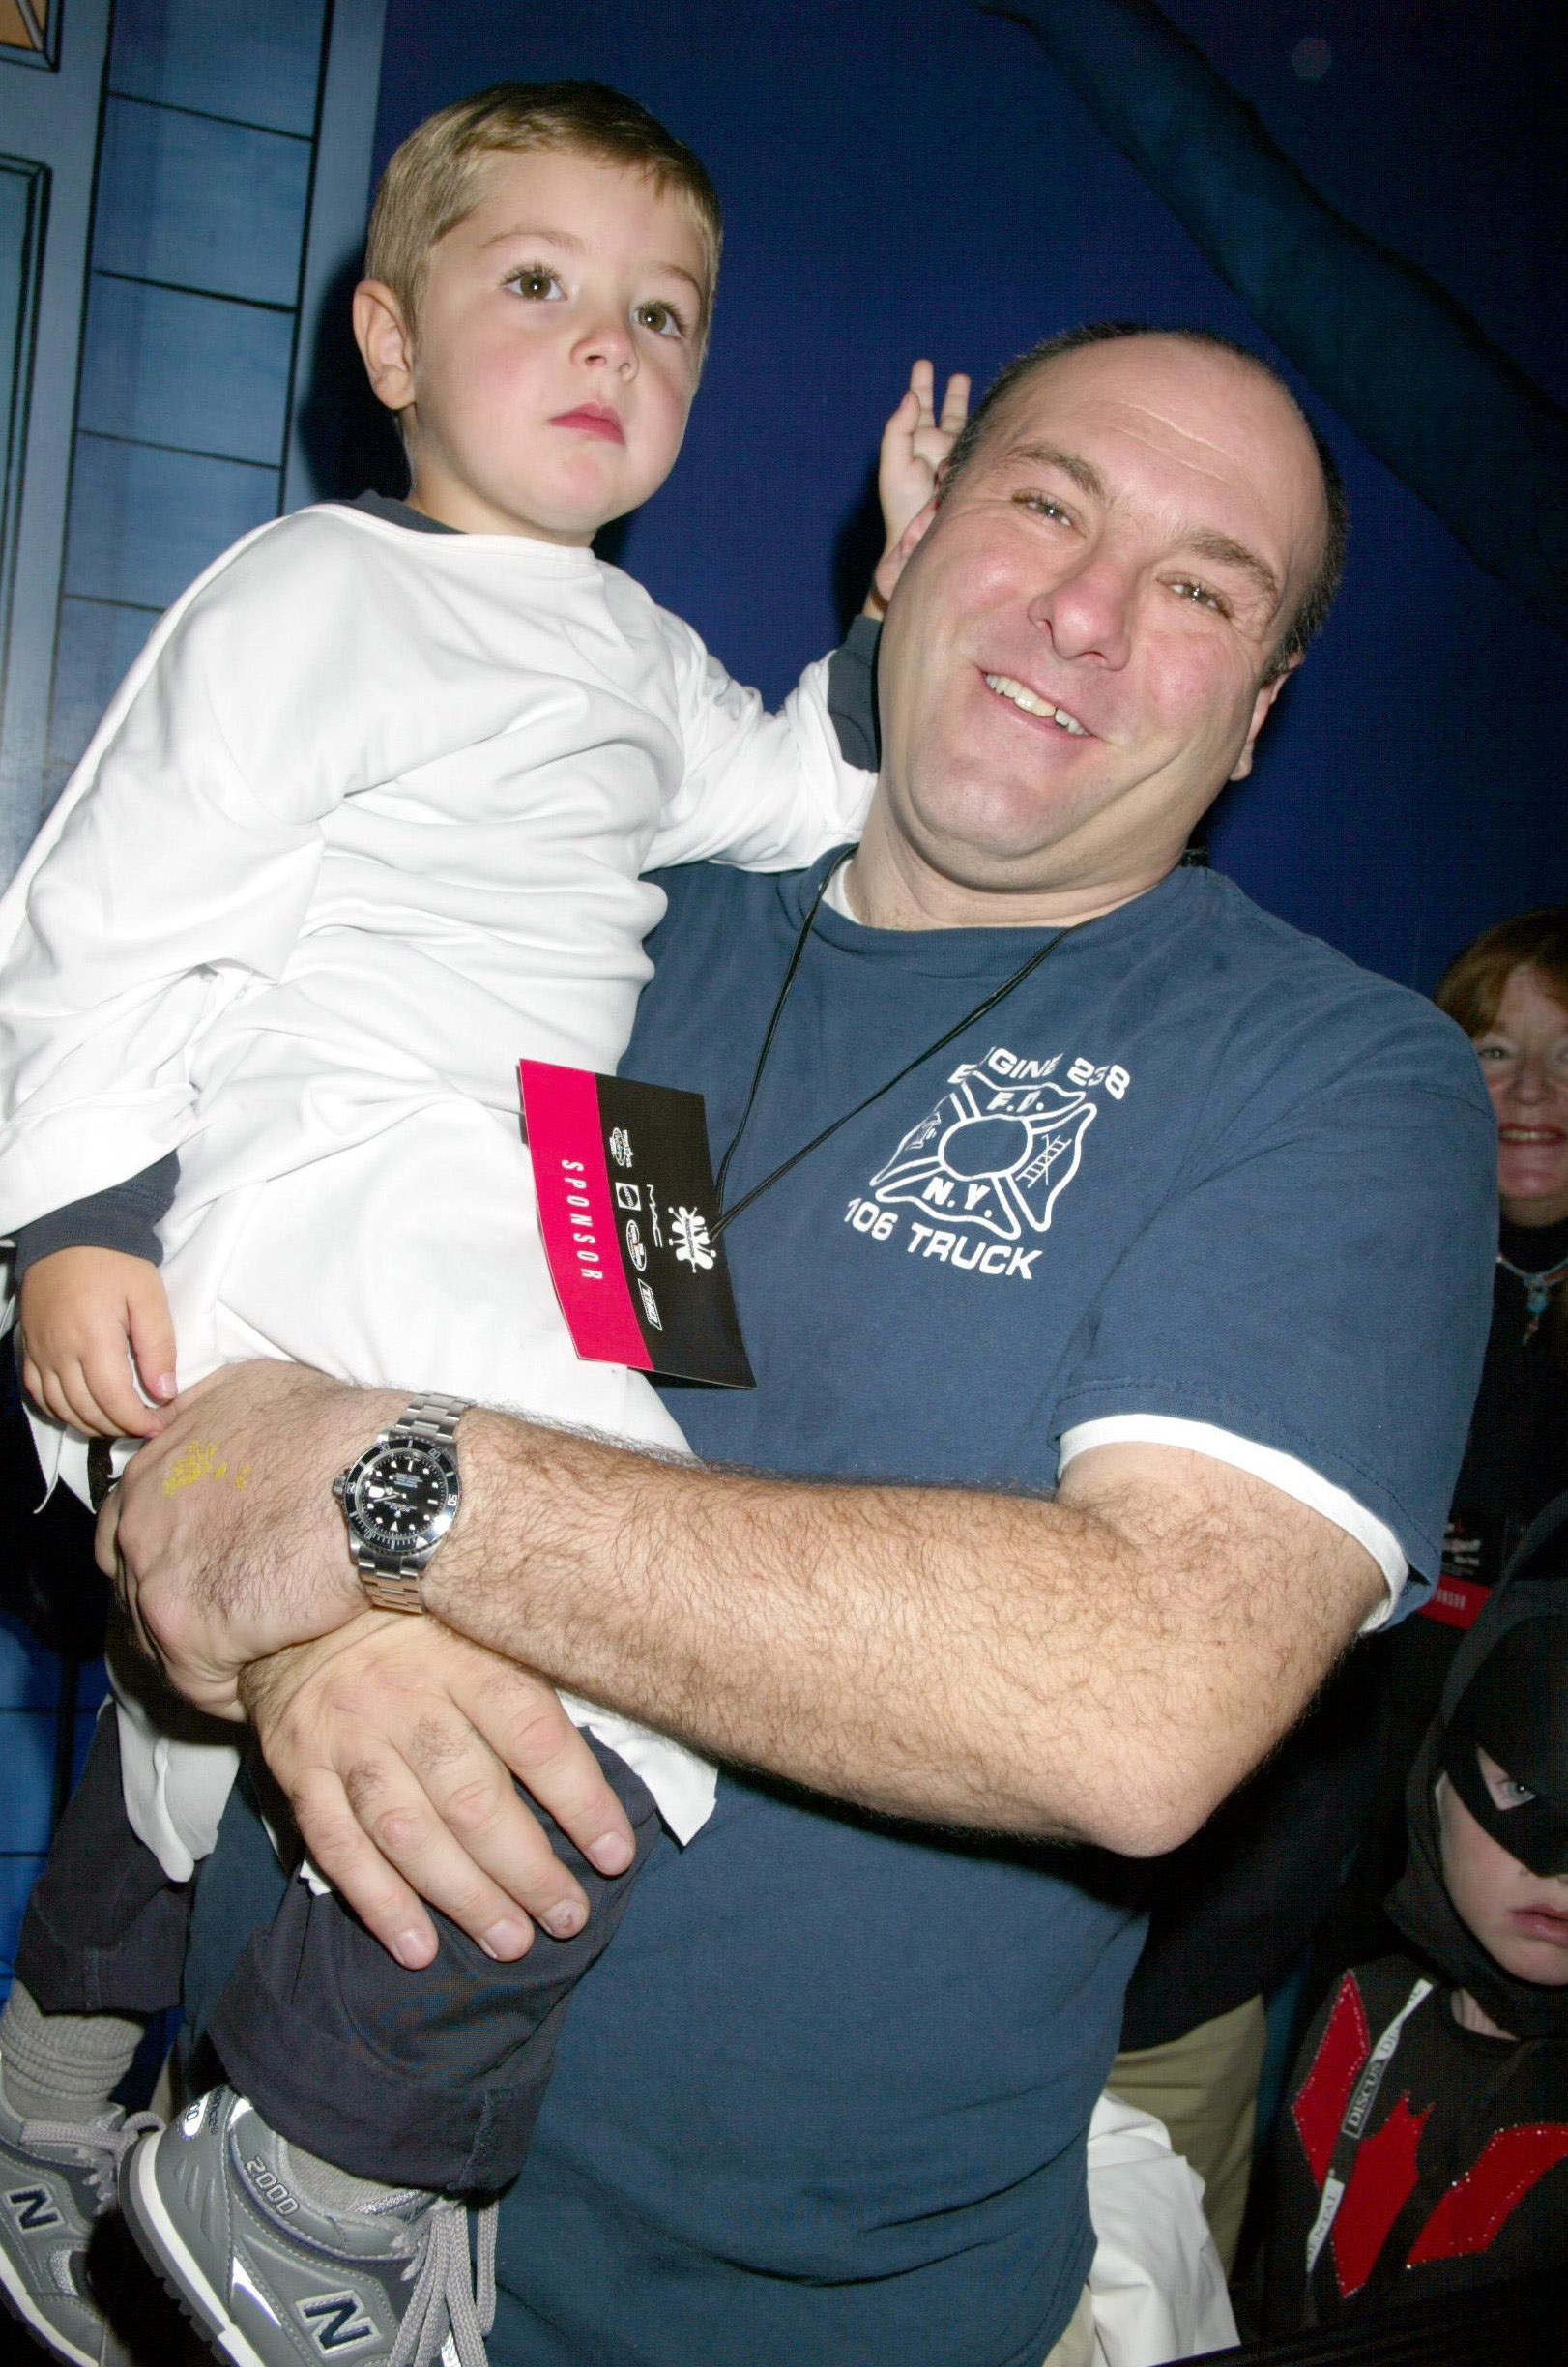 <p>James Gandolfini held his then-3-year-old son, Michael Gandolfini -- who's grown up to be an actor like his dad -- during the Nickelodeon and MAC Cosmetics benefit for the Children Affected by AIDS Foundation in New York City on Oct. 20, 2002. Michael, in fact, played the same character that made his father famous, Tony Soprano, in the October 2021 movie "The Many Saints of Newark: A Sopranos Story," which is a prequel to "The Sopranos."</p>